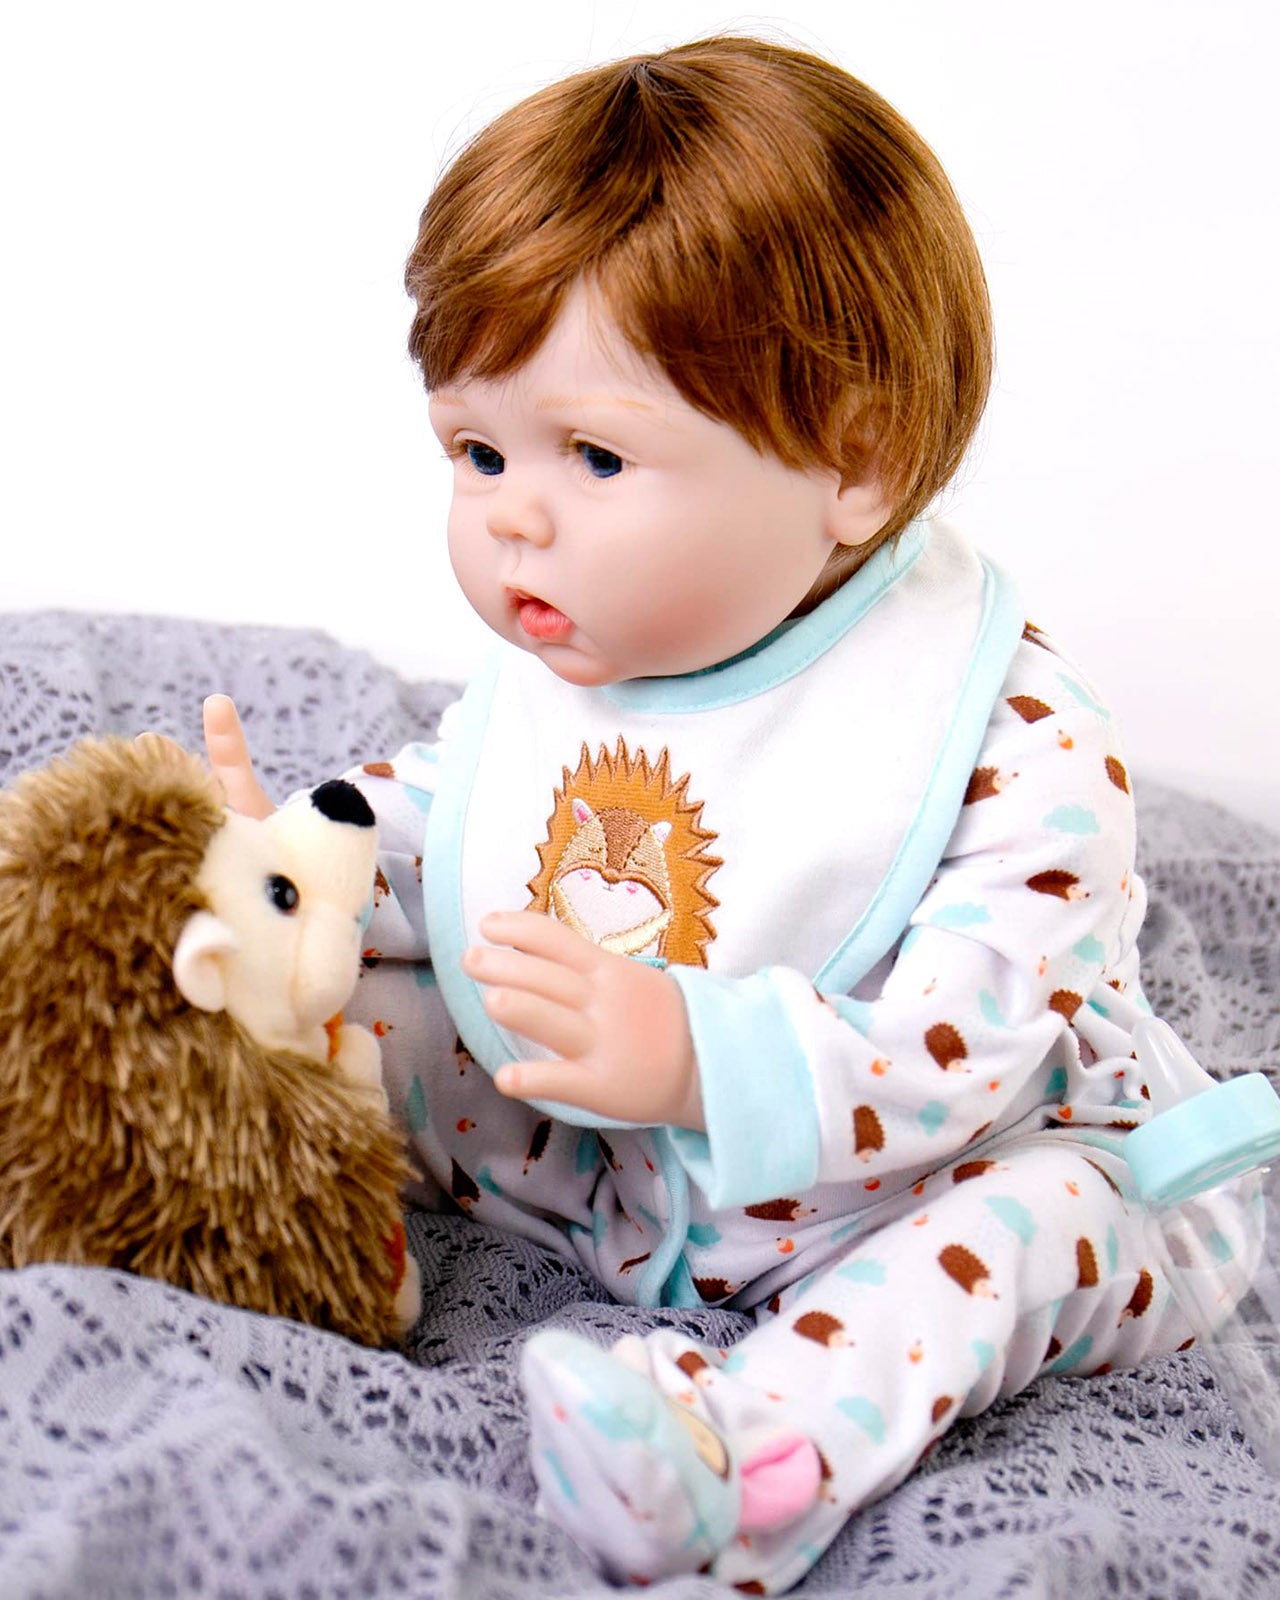 Rouka - 22" Reborn Baby Dolls Lifelike Awake Toddlers Girl with Weighted Cloth Body